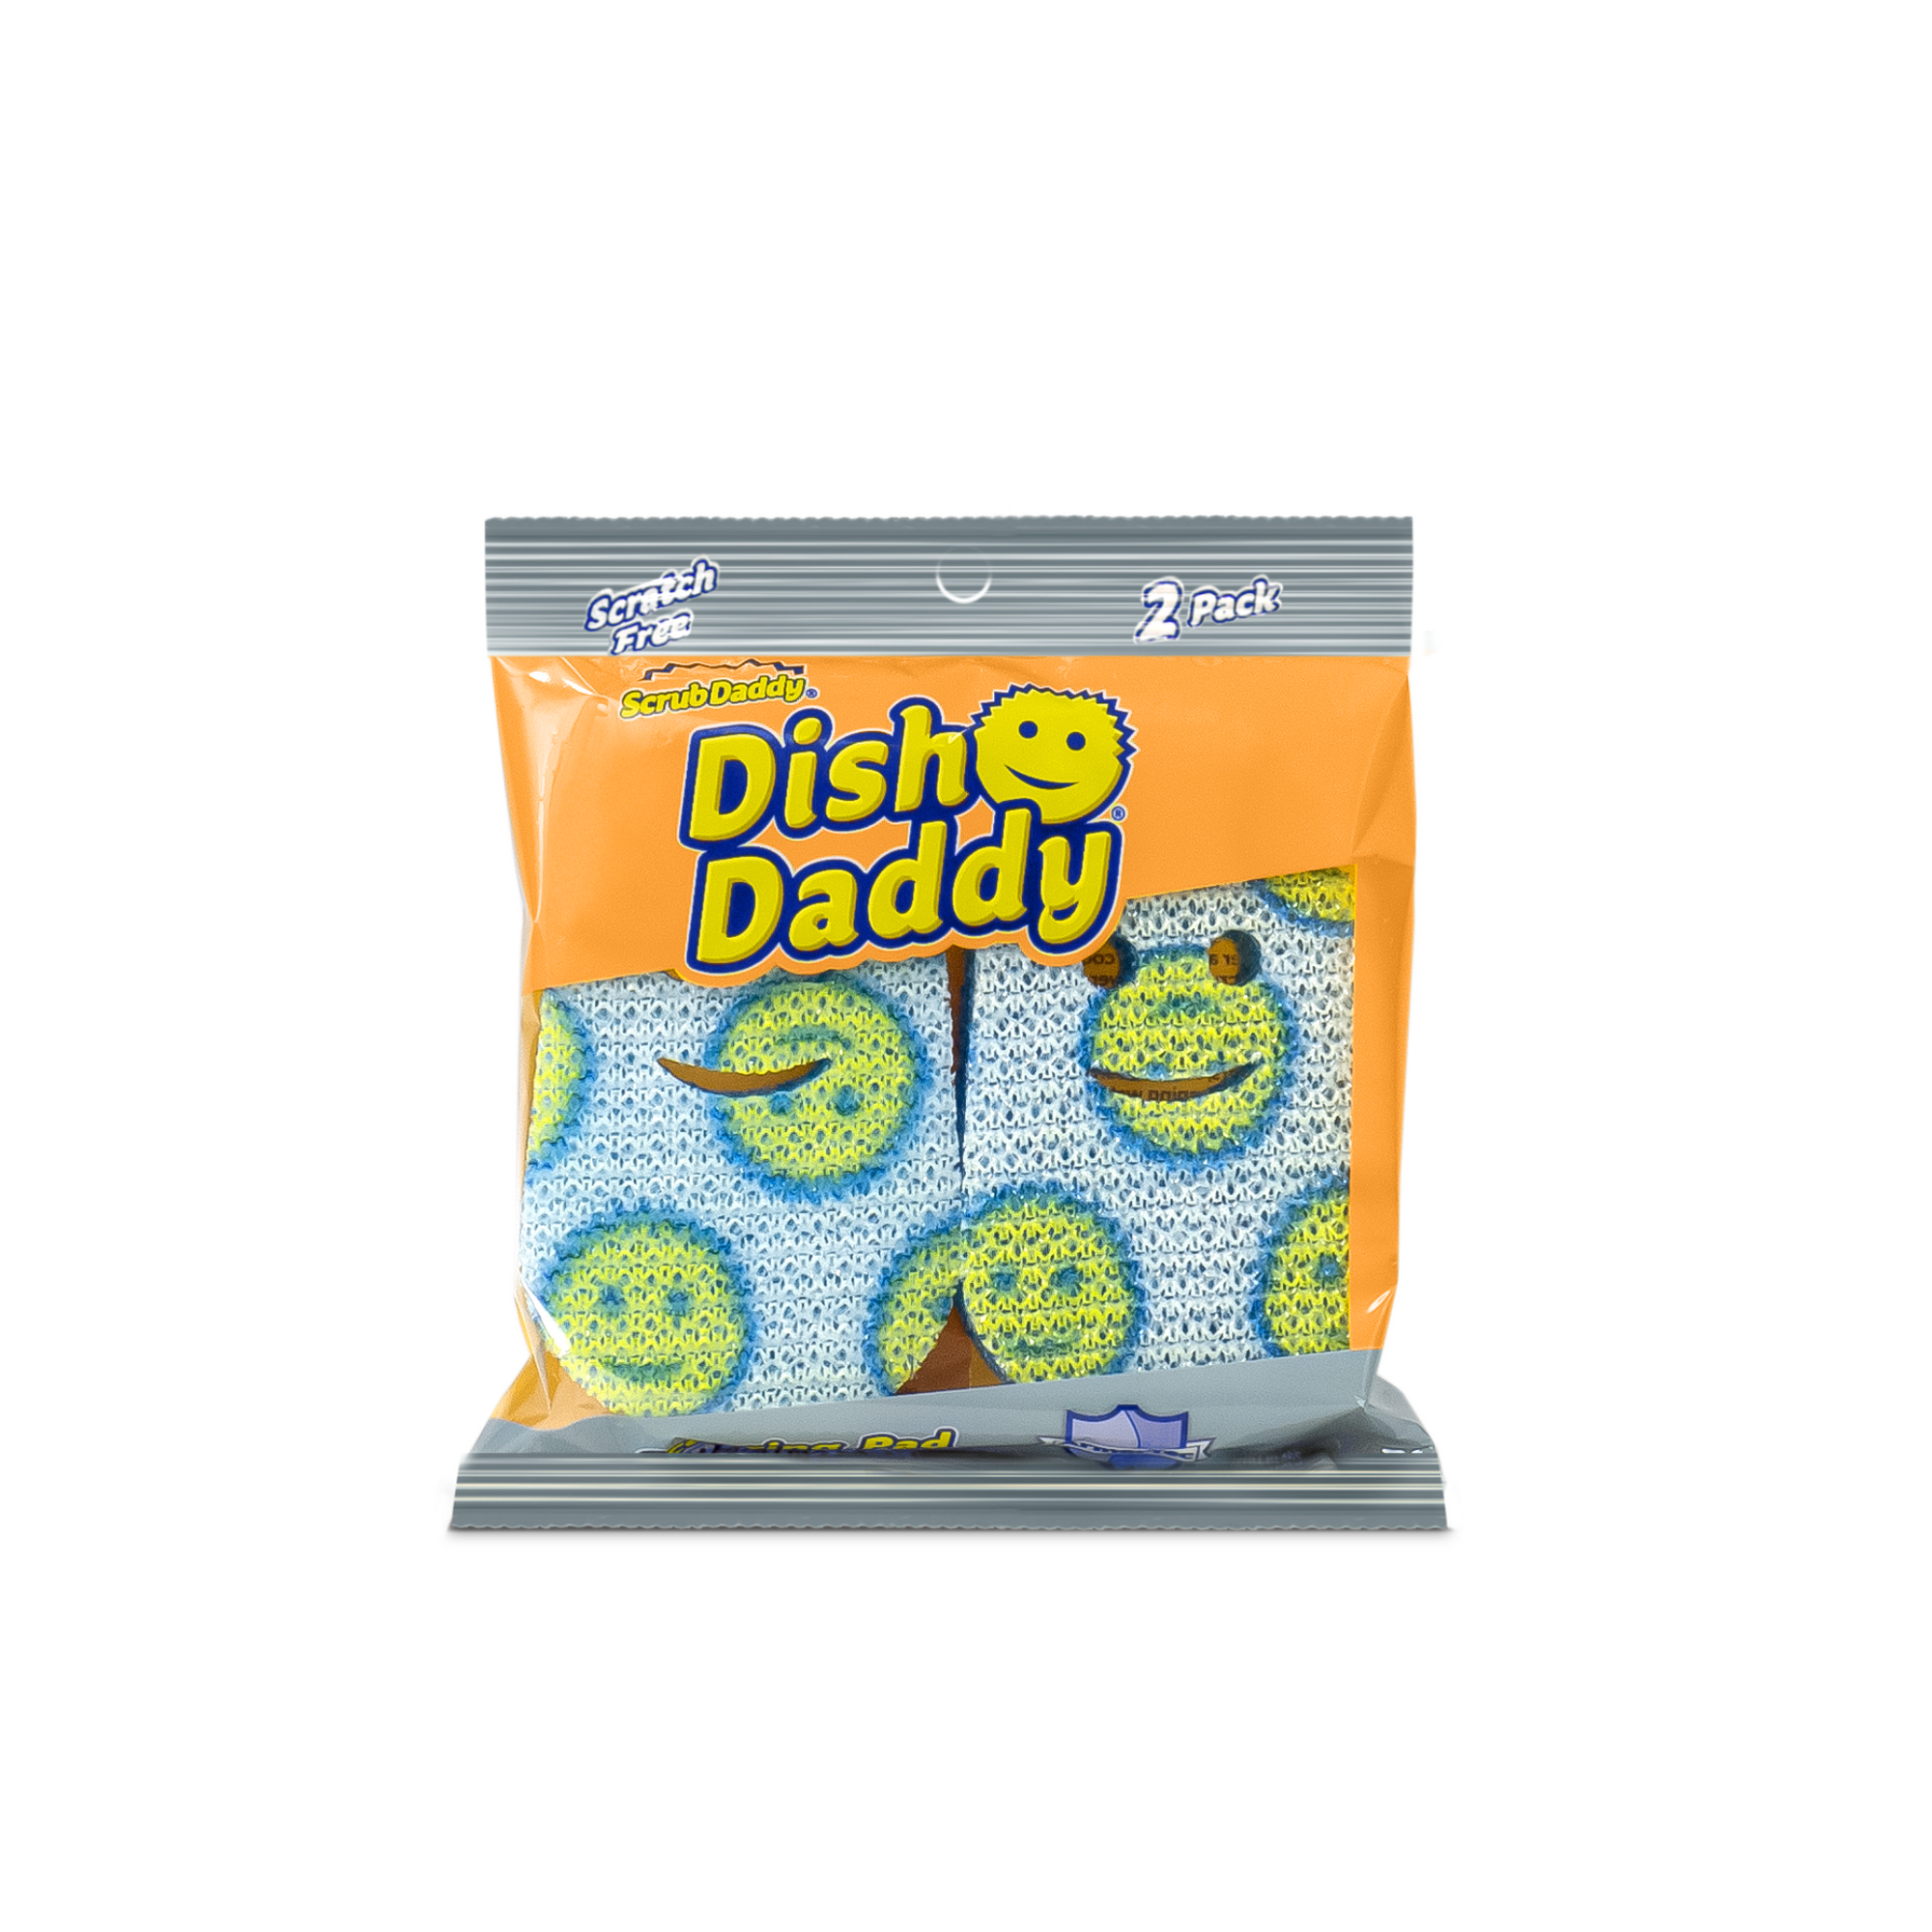 Dish Daddy Scouring Pad (2 Pack)